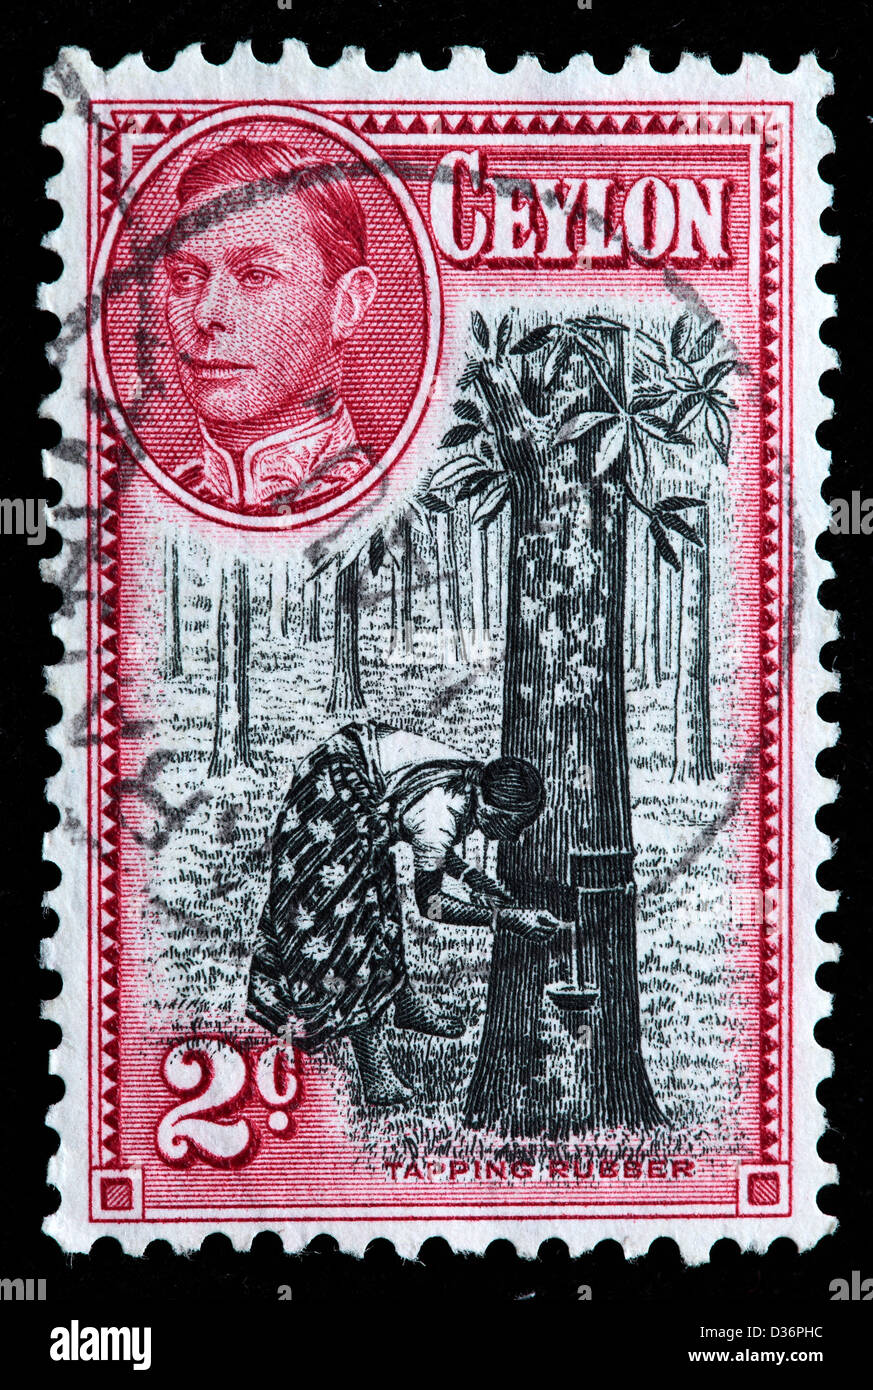 Tapping rubber, postage stamp, Ceylon, 1938 Stock Photo